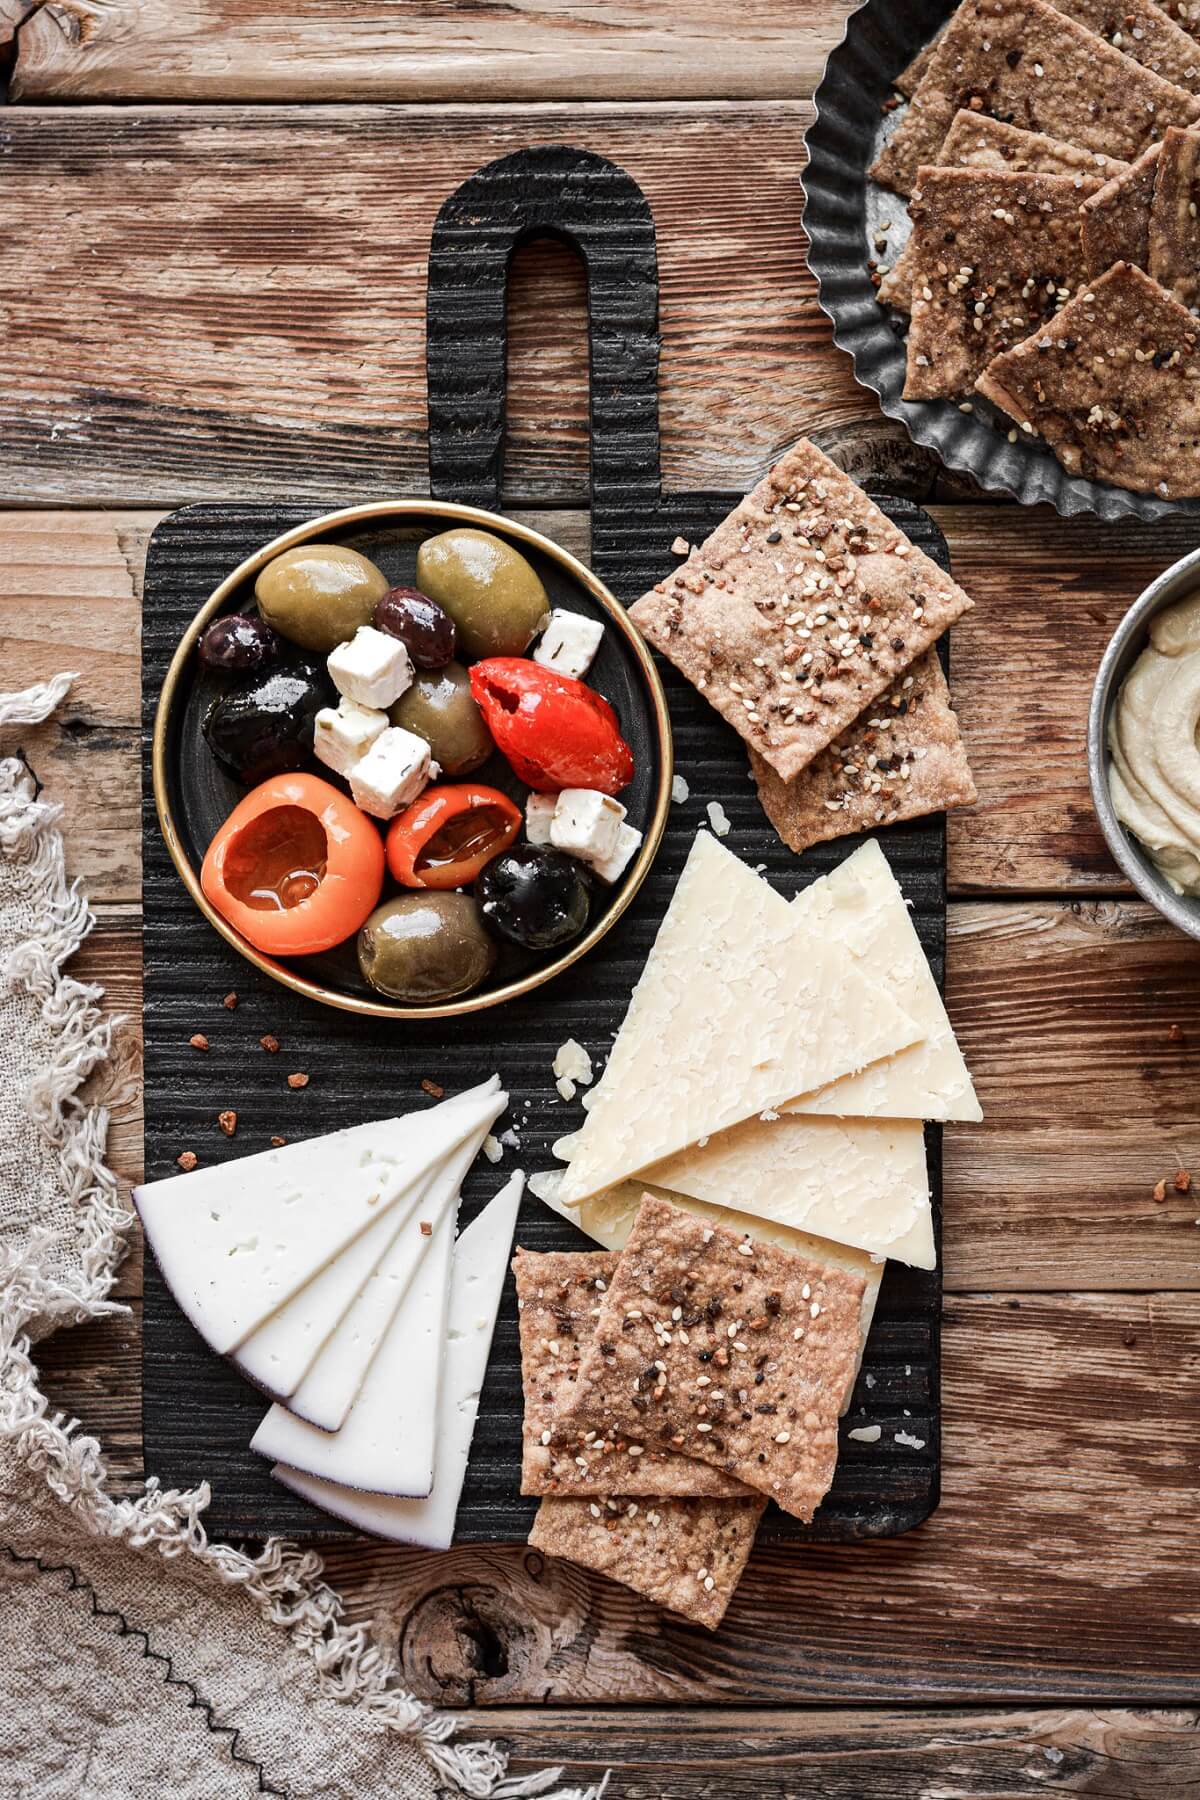 A cutting board with olives, cheese and homemade crackers.